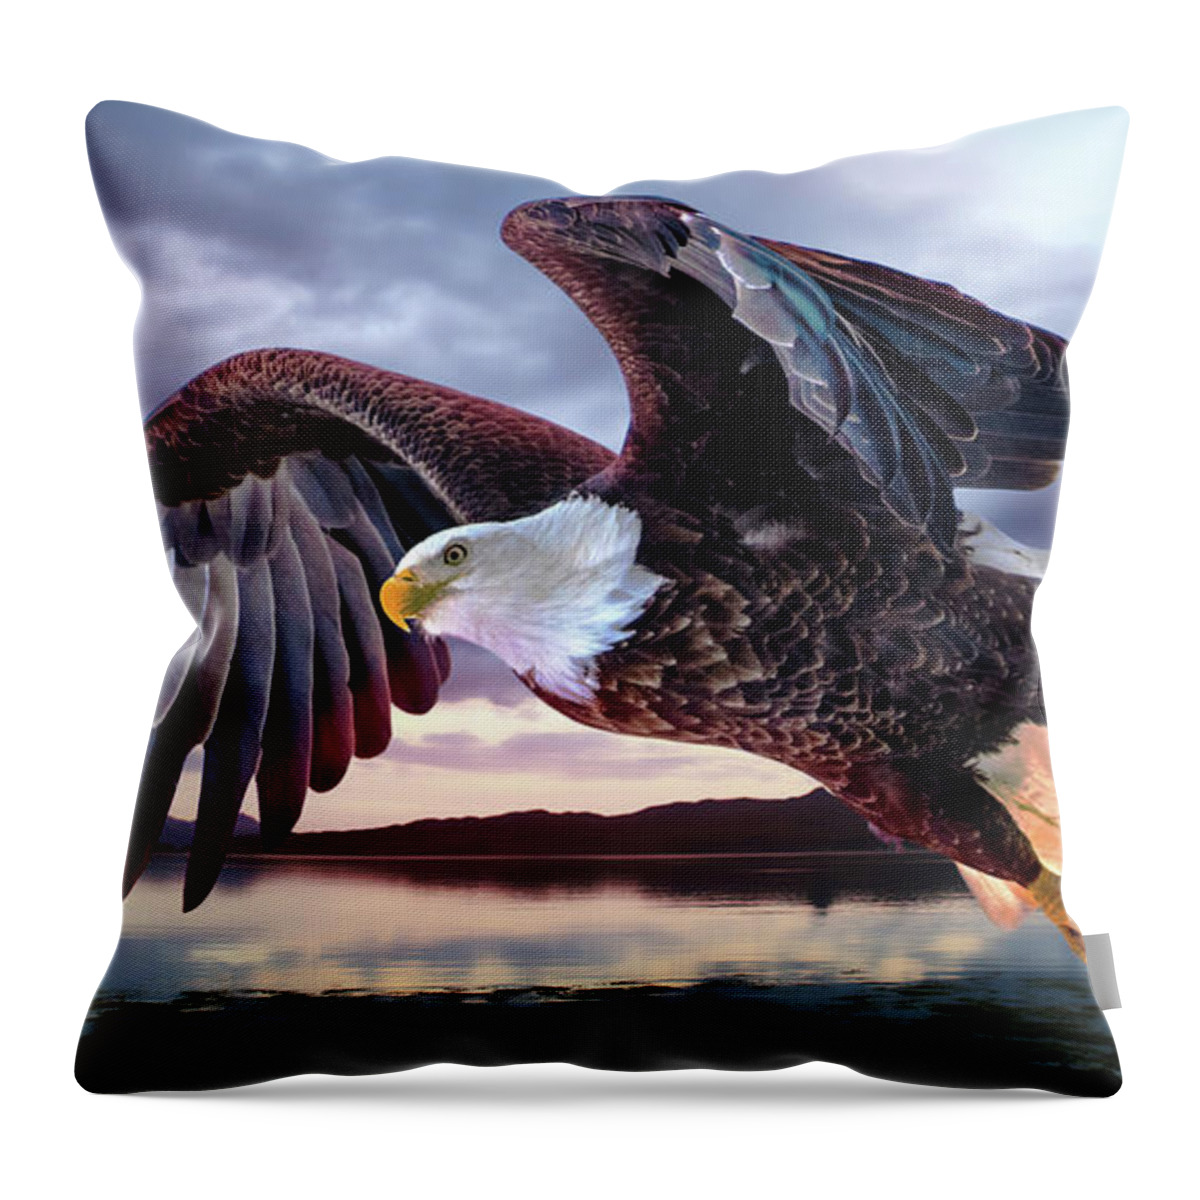 American Bald Eagle Throw Pillow featuring the photograph American Bald Eagle - Plum Island by Sandra Rust